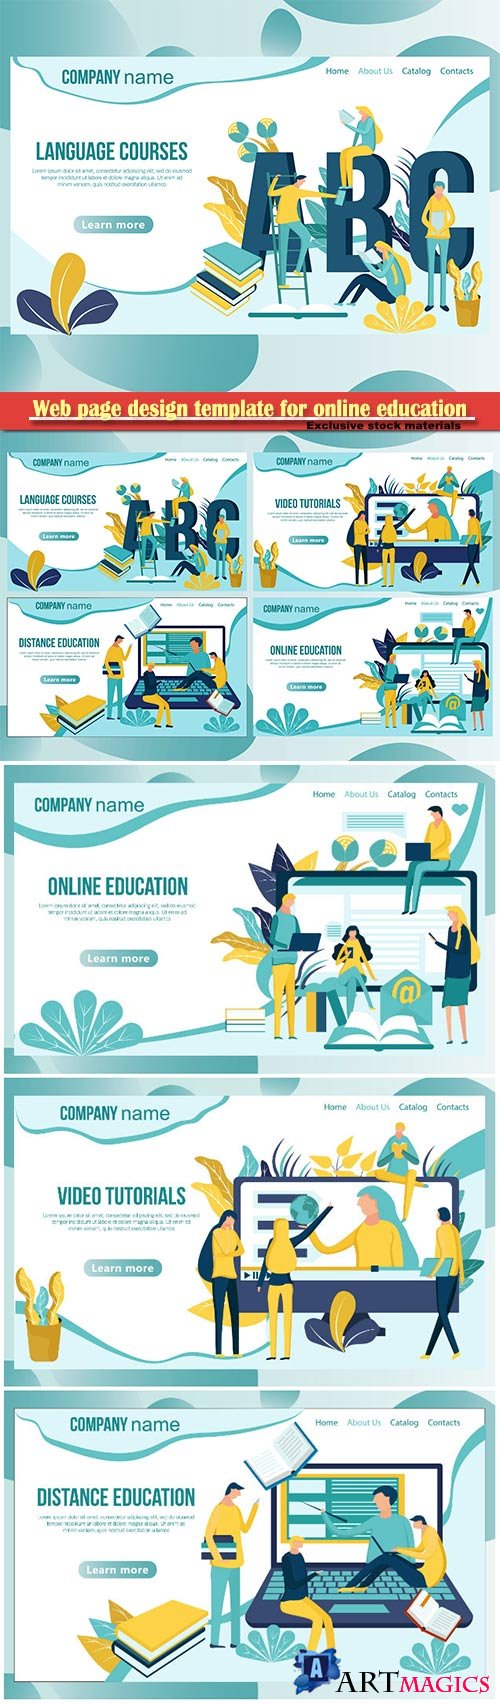 Web page design template for online education vector illustration